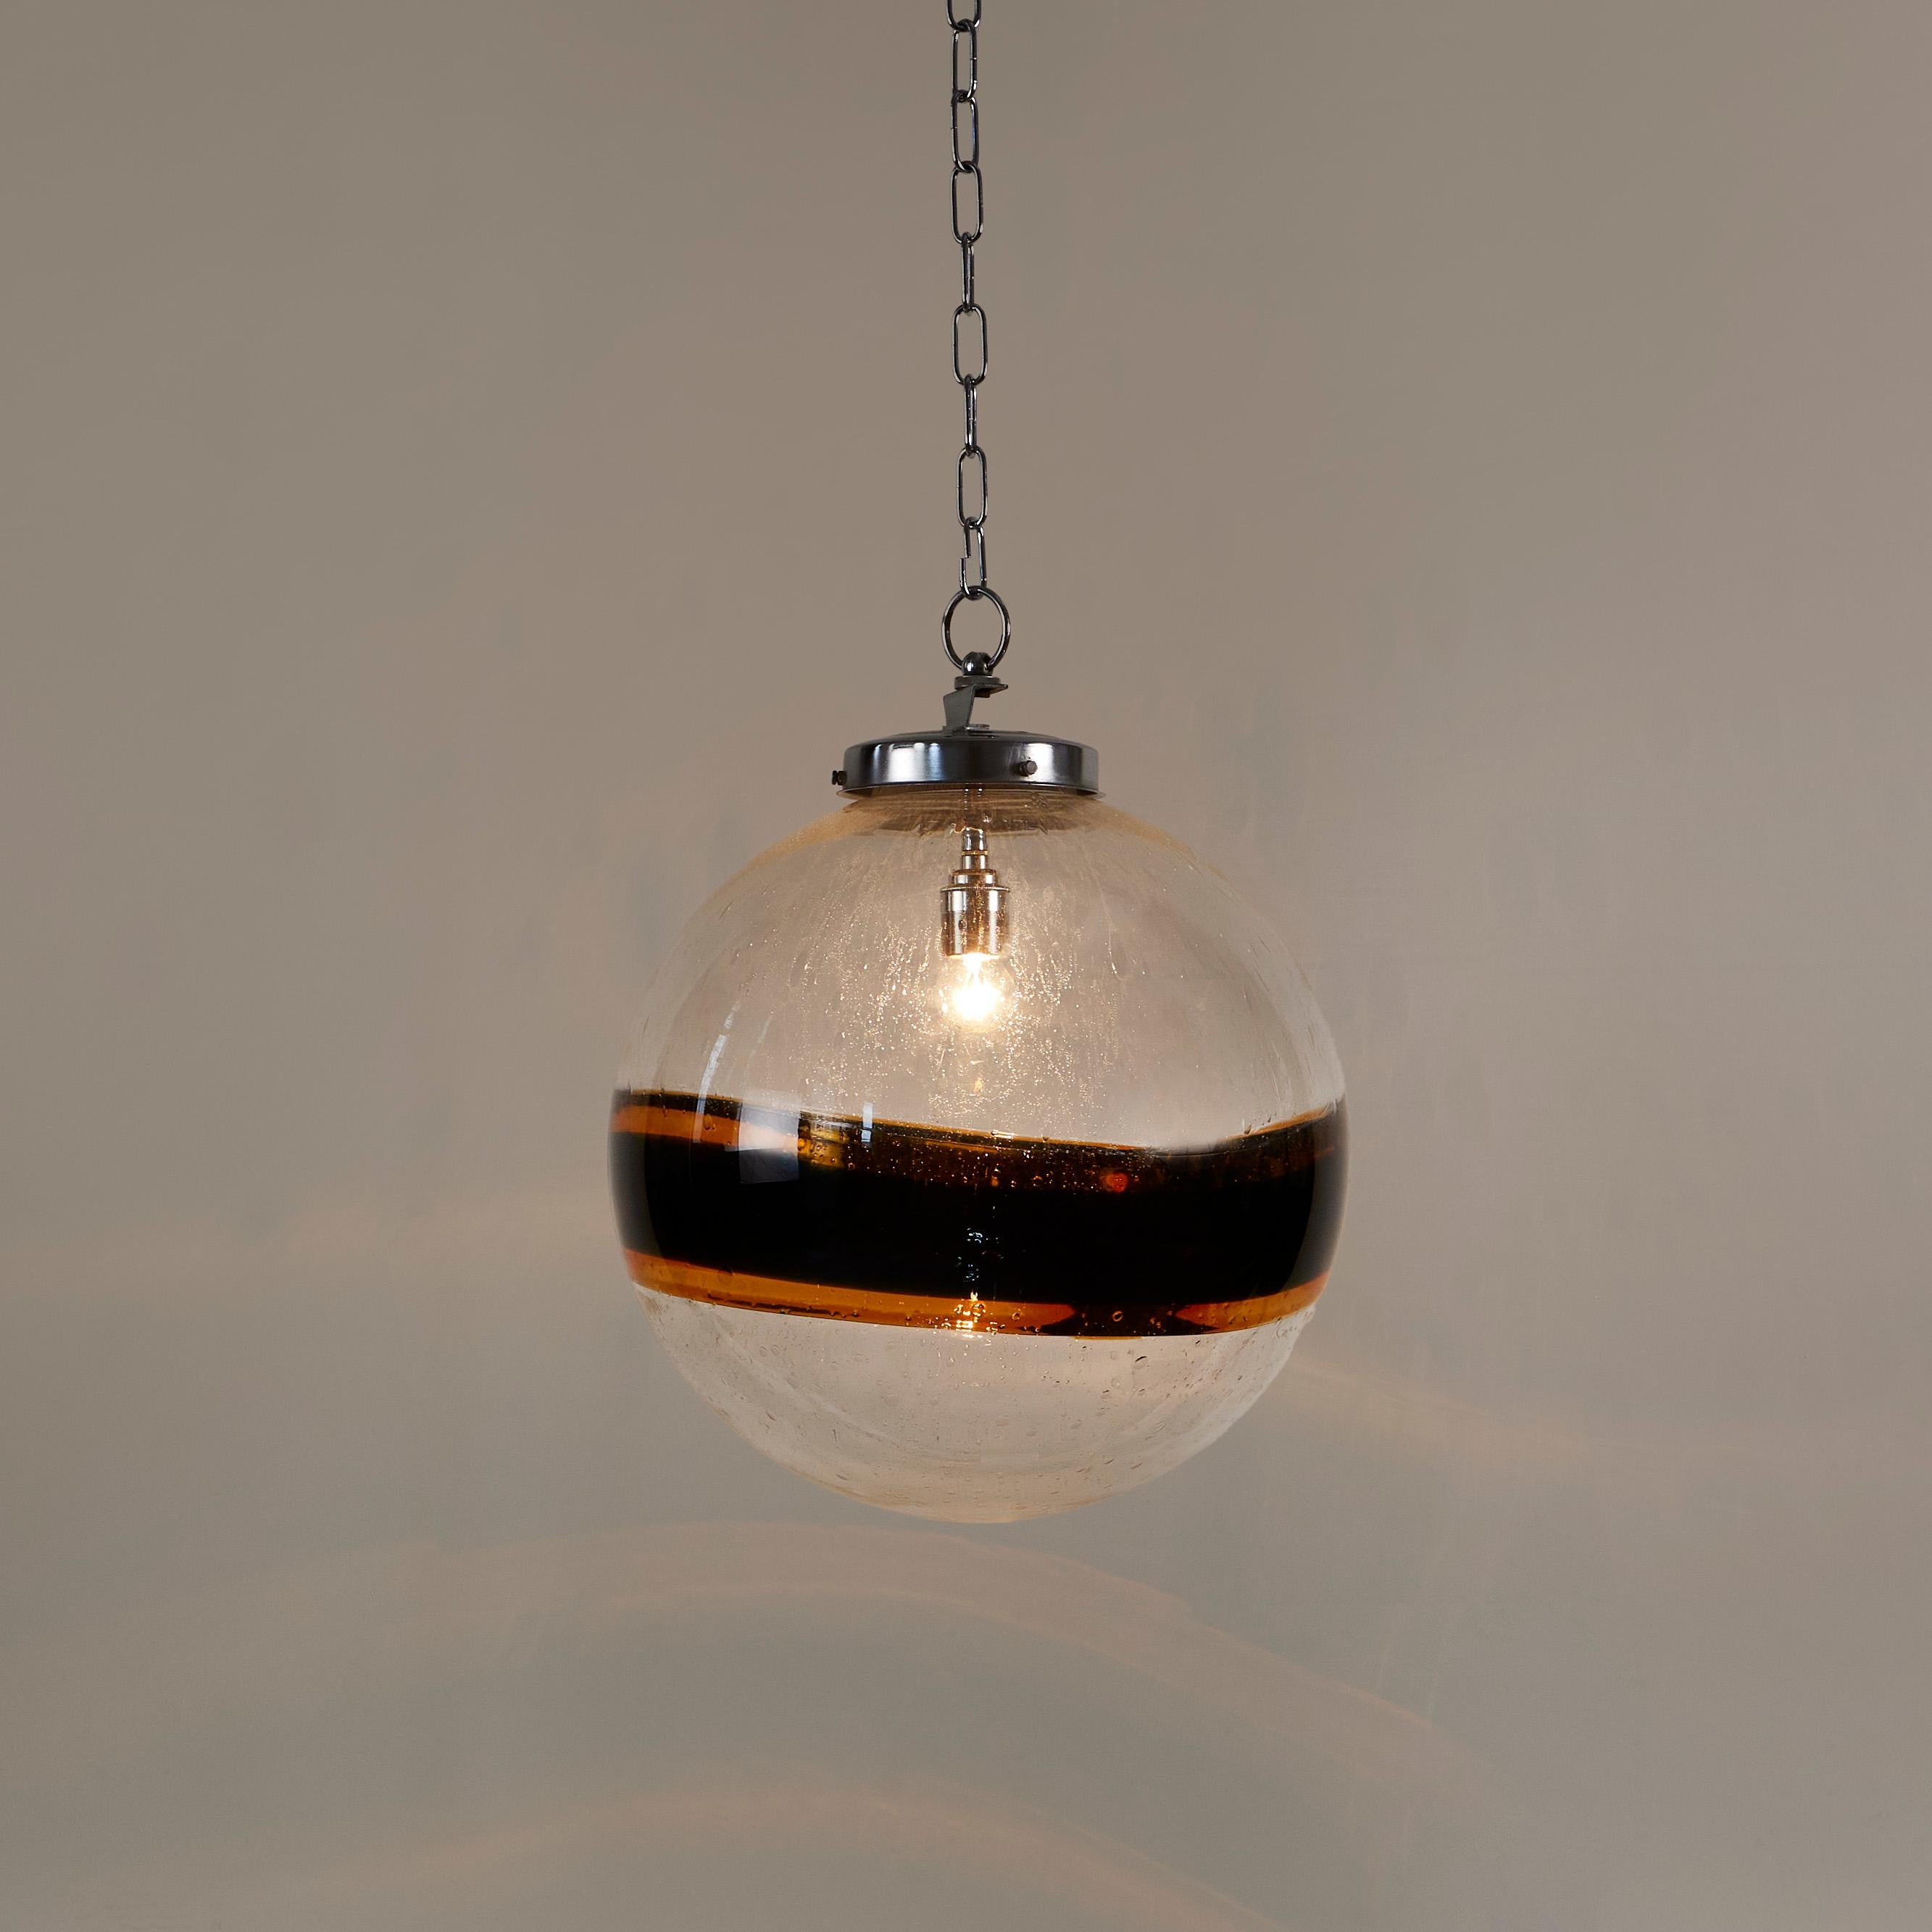 Murano handblown glass ball pendant of transparent bubble patterned clear glass with decorative thick black and gold stripe. Chrome fitting.
